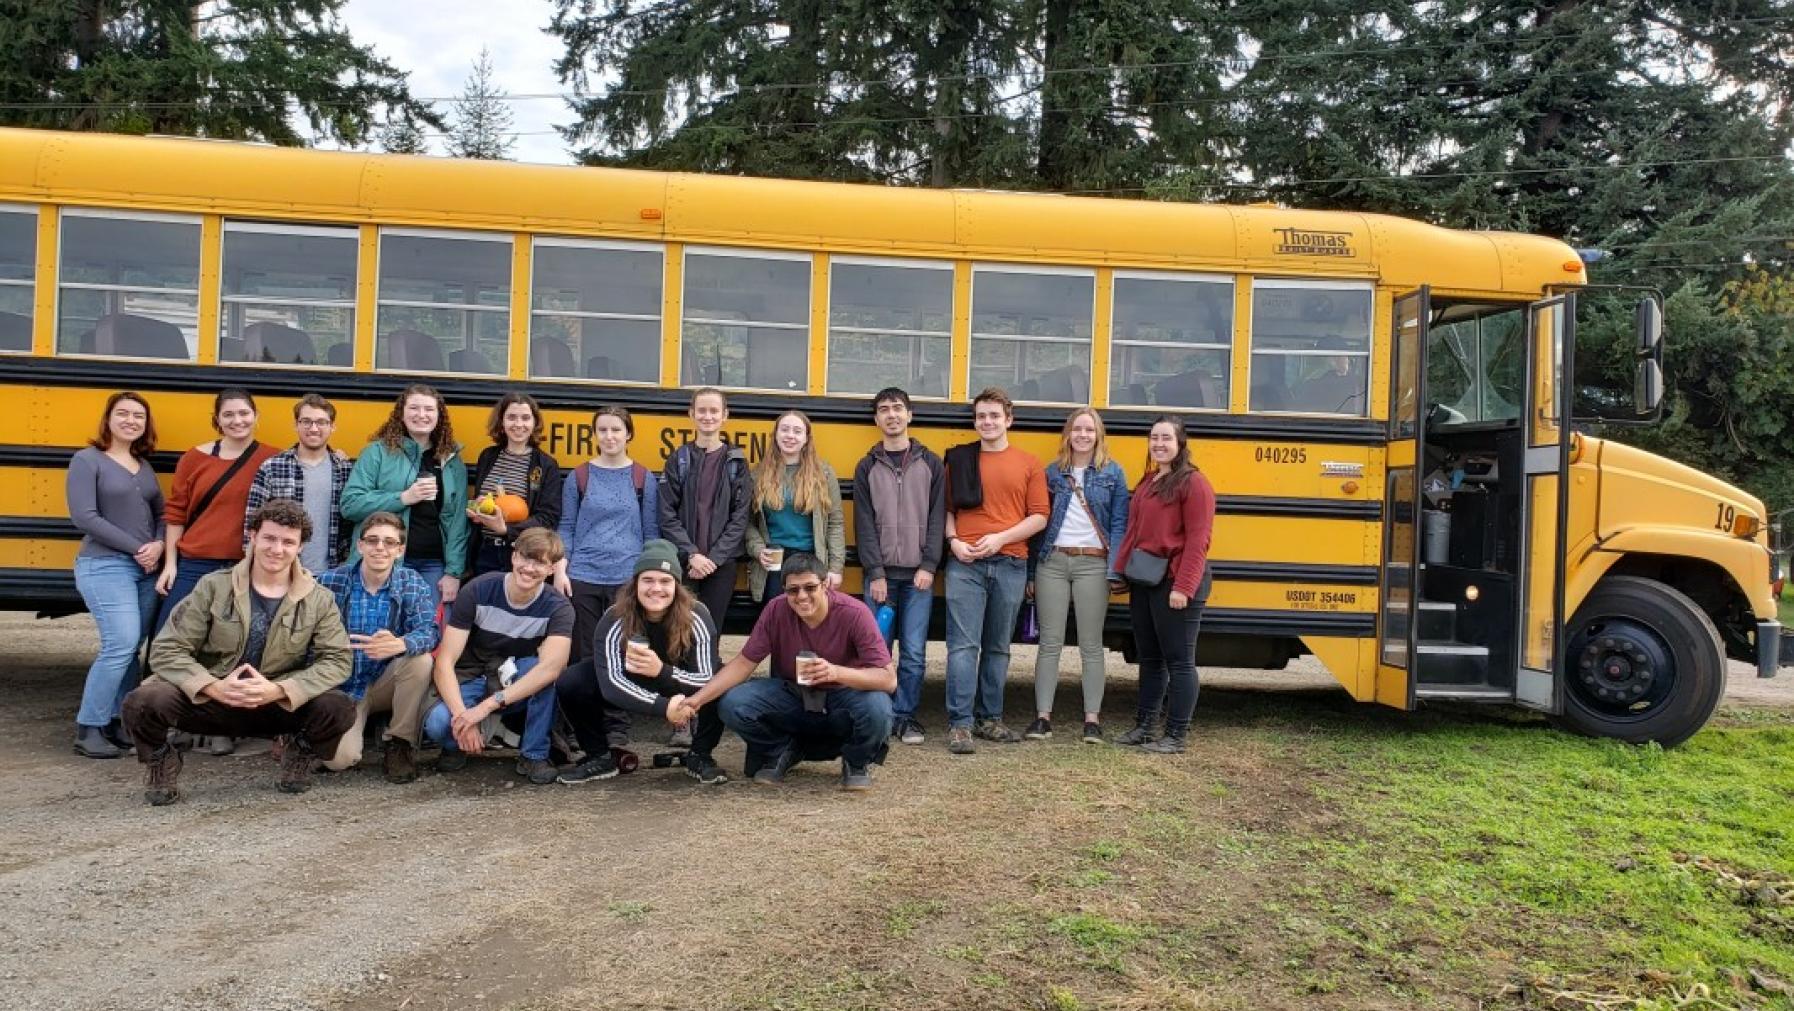 A group of people in front of a bus.